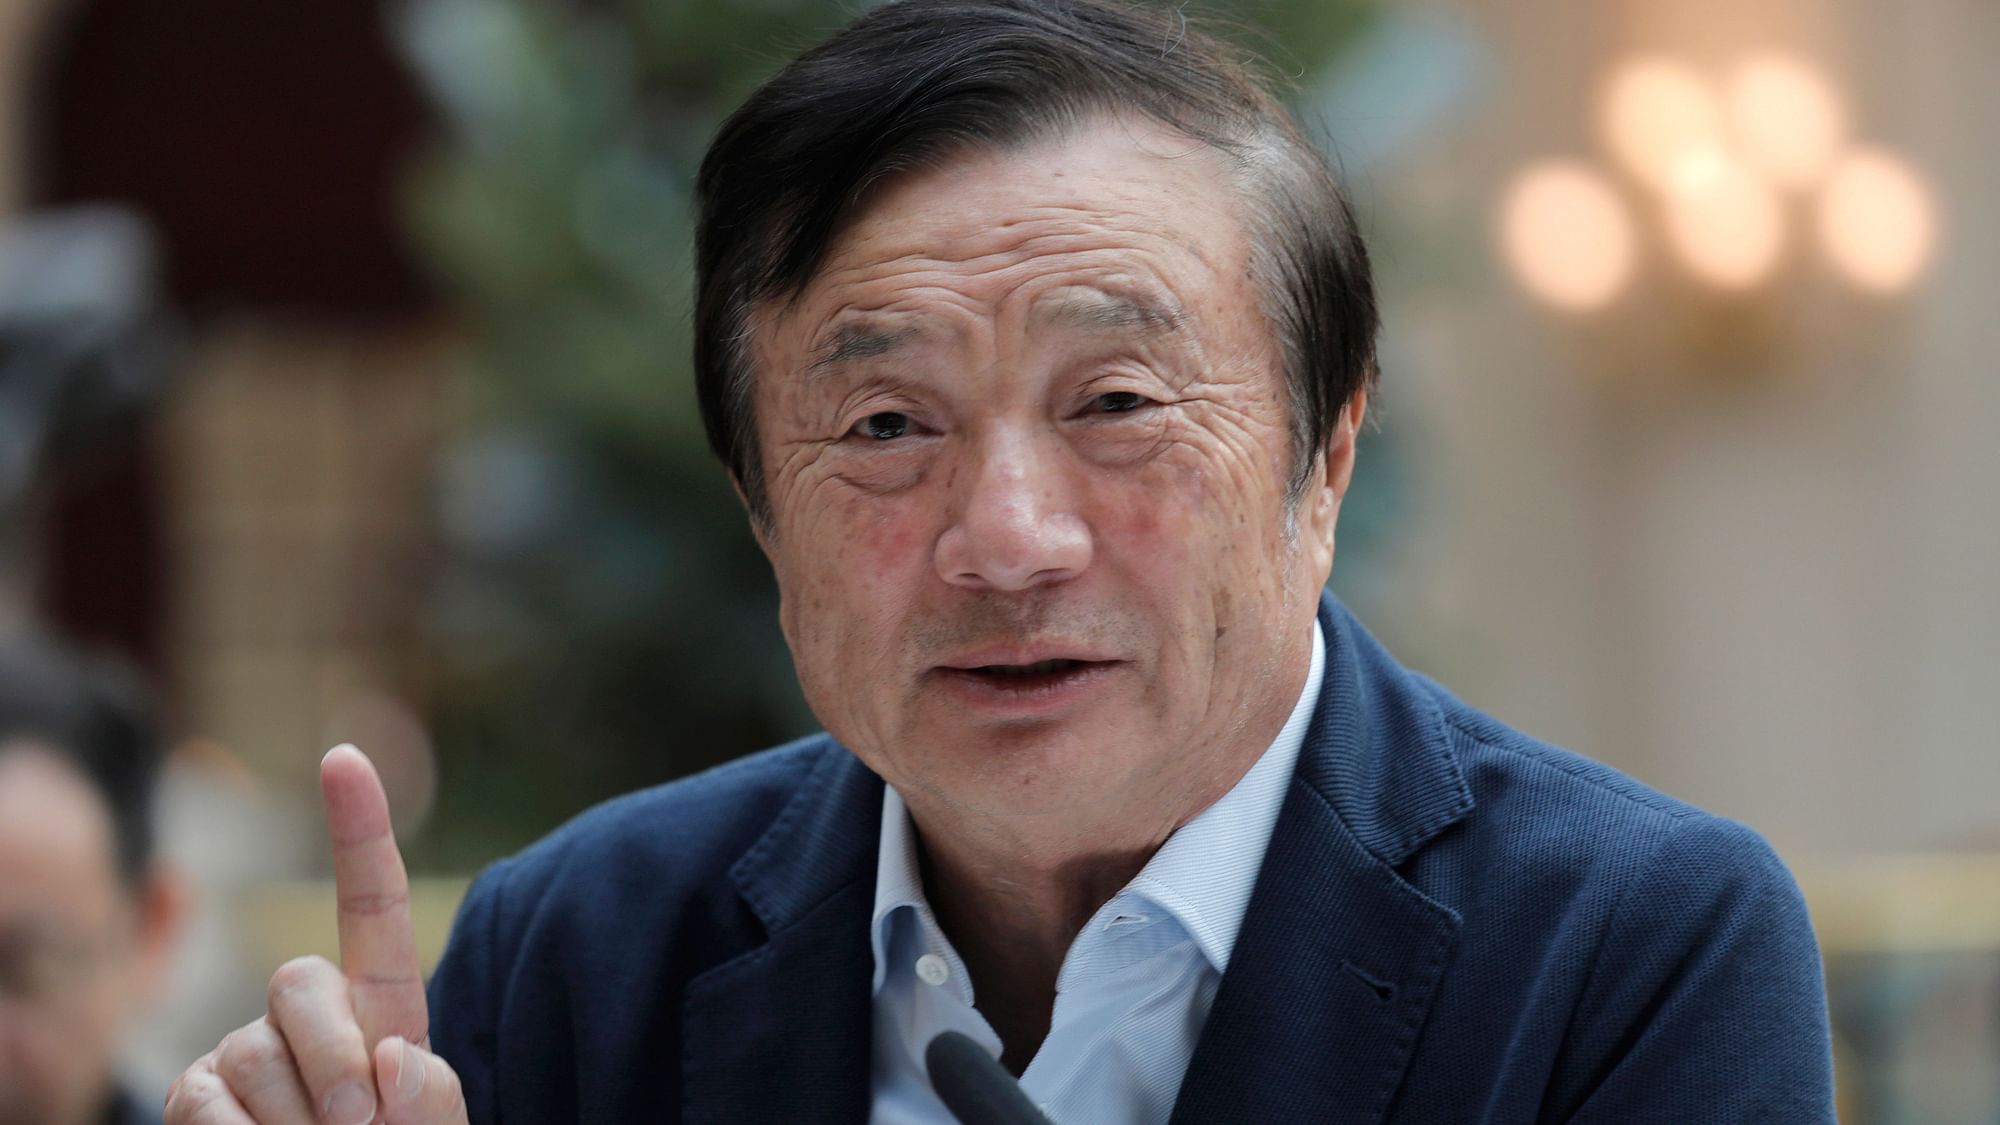 Ren Zhengfei spoke in a rare meeting with foreign reporters as Huawei Technologies Ltd. tries to protect its access to global telecom carriers that are investing heavily in next-gen technology.